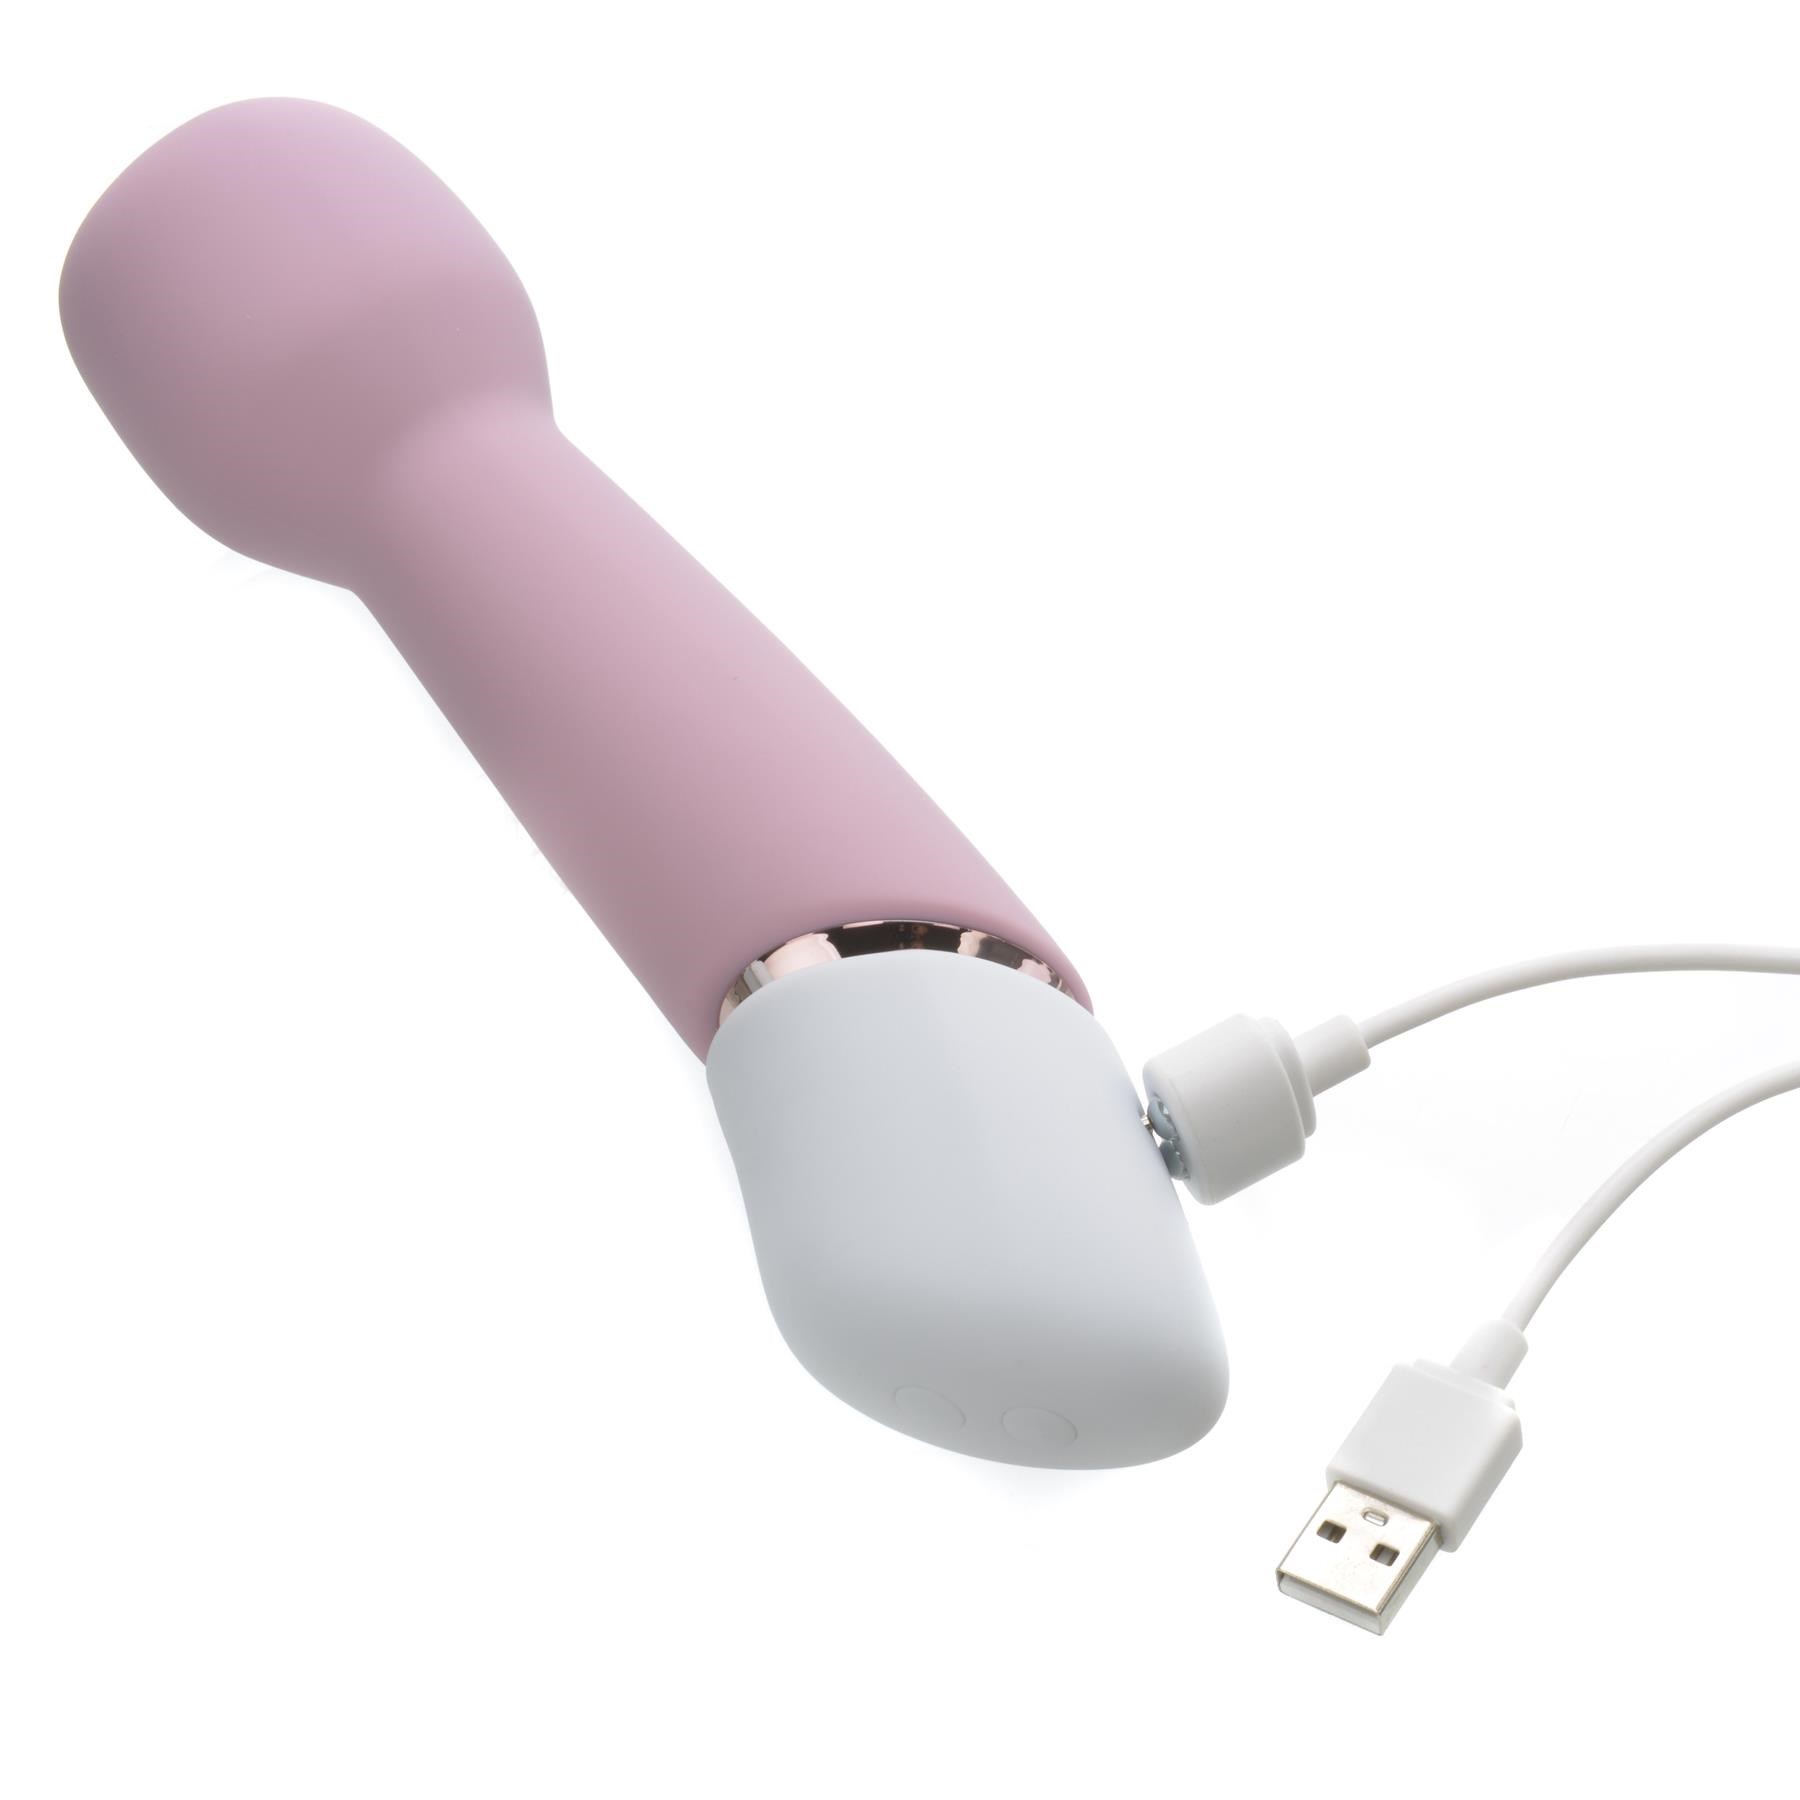 Satisfyer Marvelous Four Air Pulse Vibrator Set - Showing Where Charging Cable is Placed